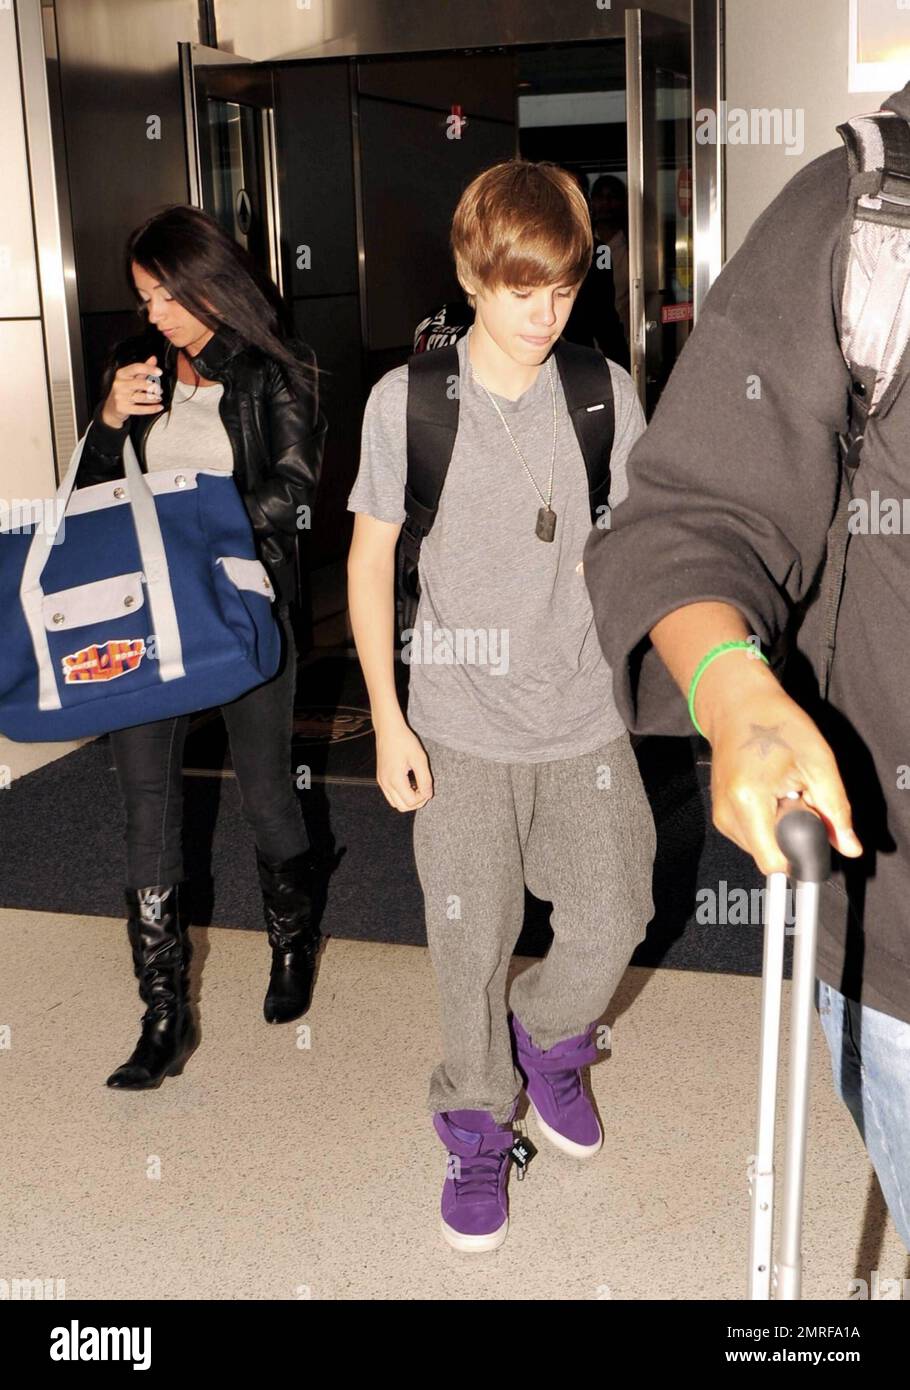 EXCLUSIVE!! Canadian teen pop star Justin Bieber dons some colorful purple  high-top sneakers for his flight out of Miami International Airport after  attending Super Bowl festivities in Miami, FL. 2/8/10 Stock Photo -